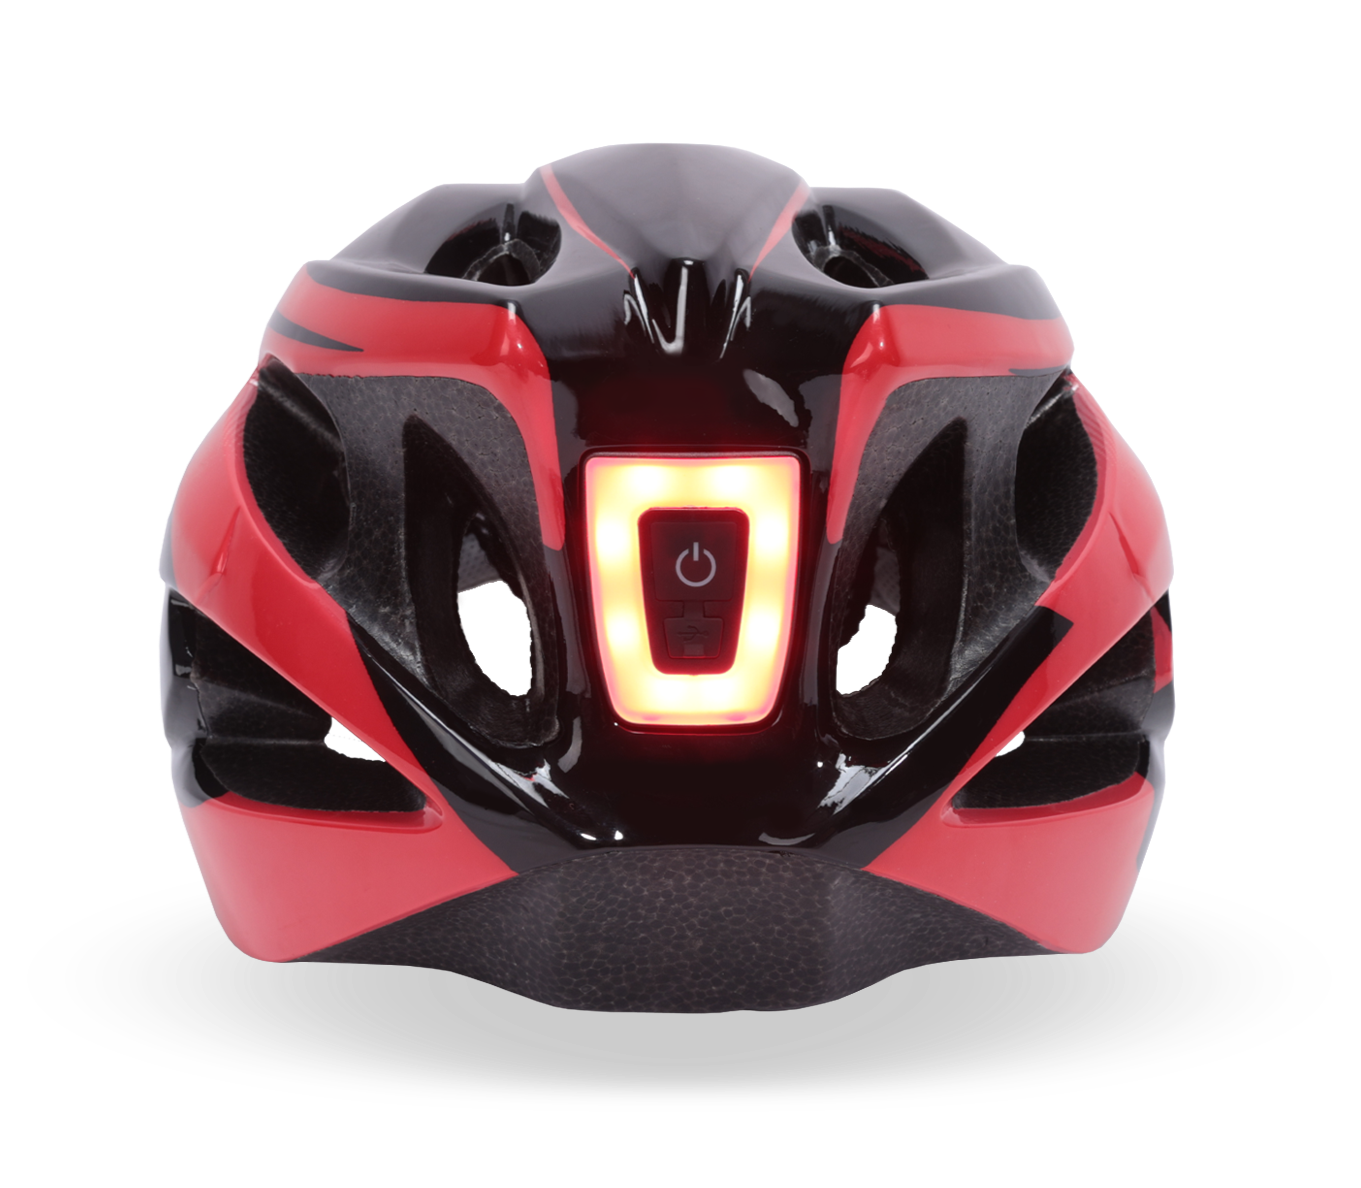 EMotorad Slipstream helmet - Adjustable Cycle Helmet with Front and Back LED Safety Light for Ages 12 Years and Above